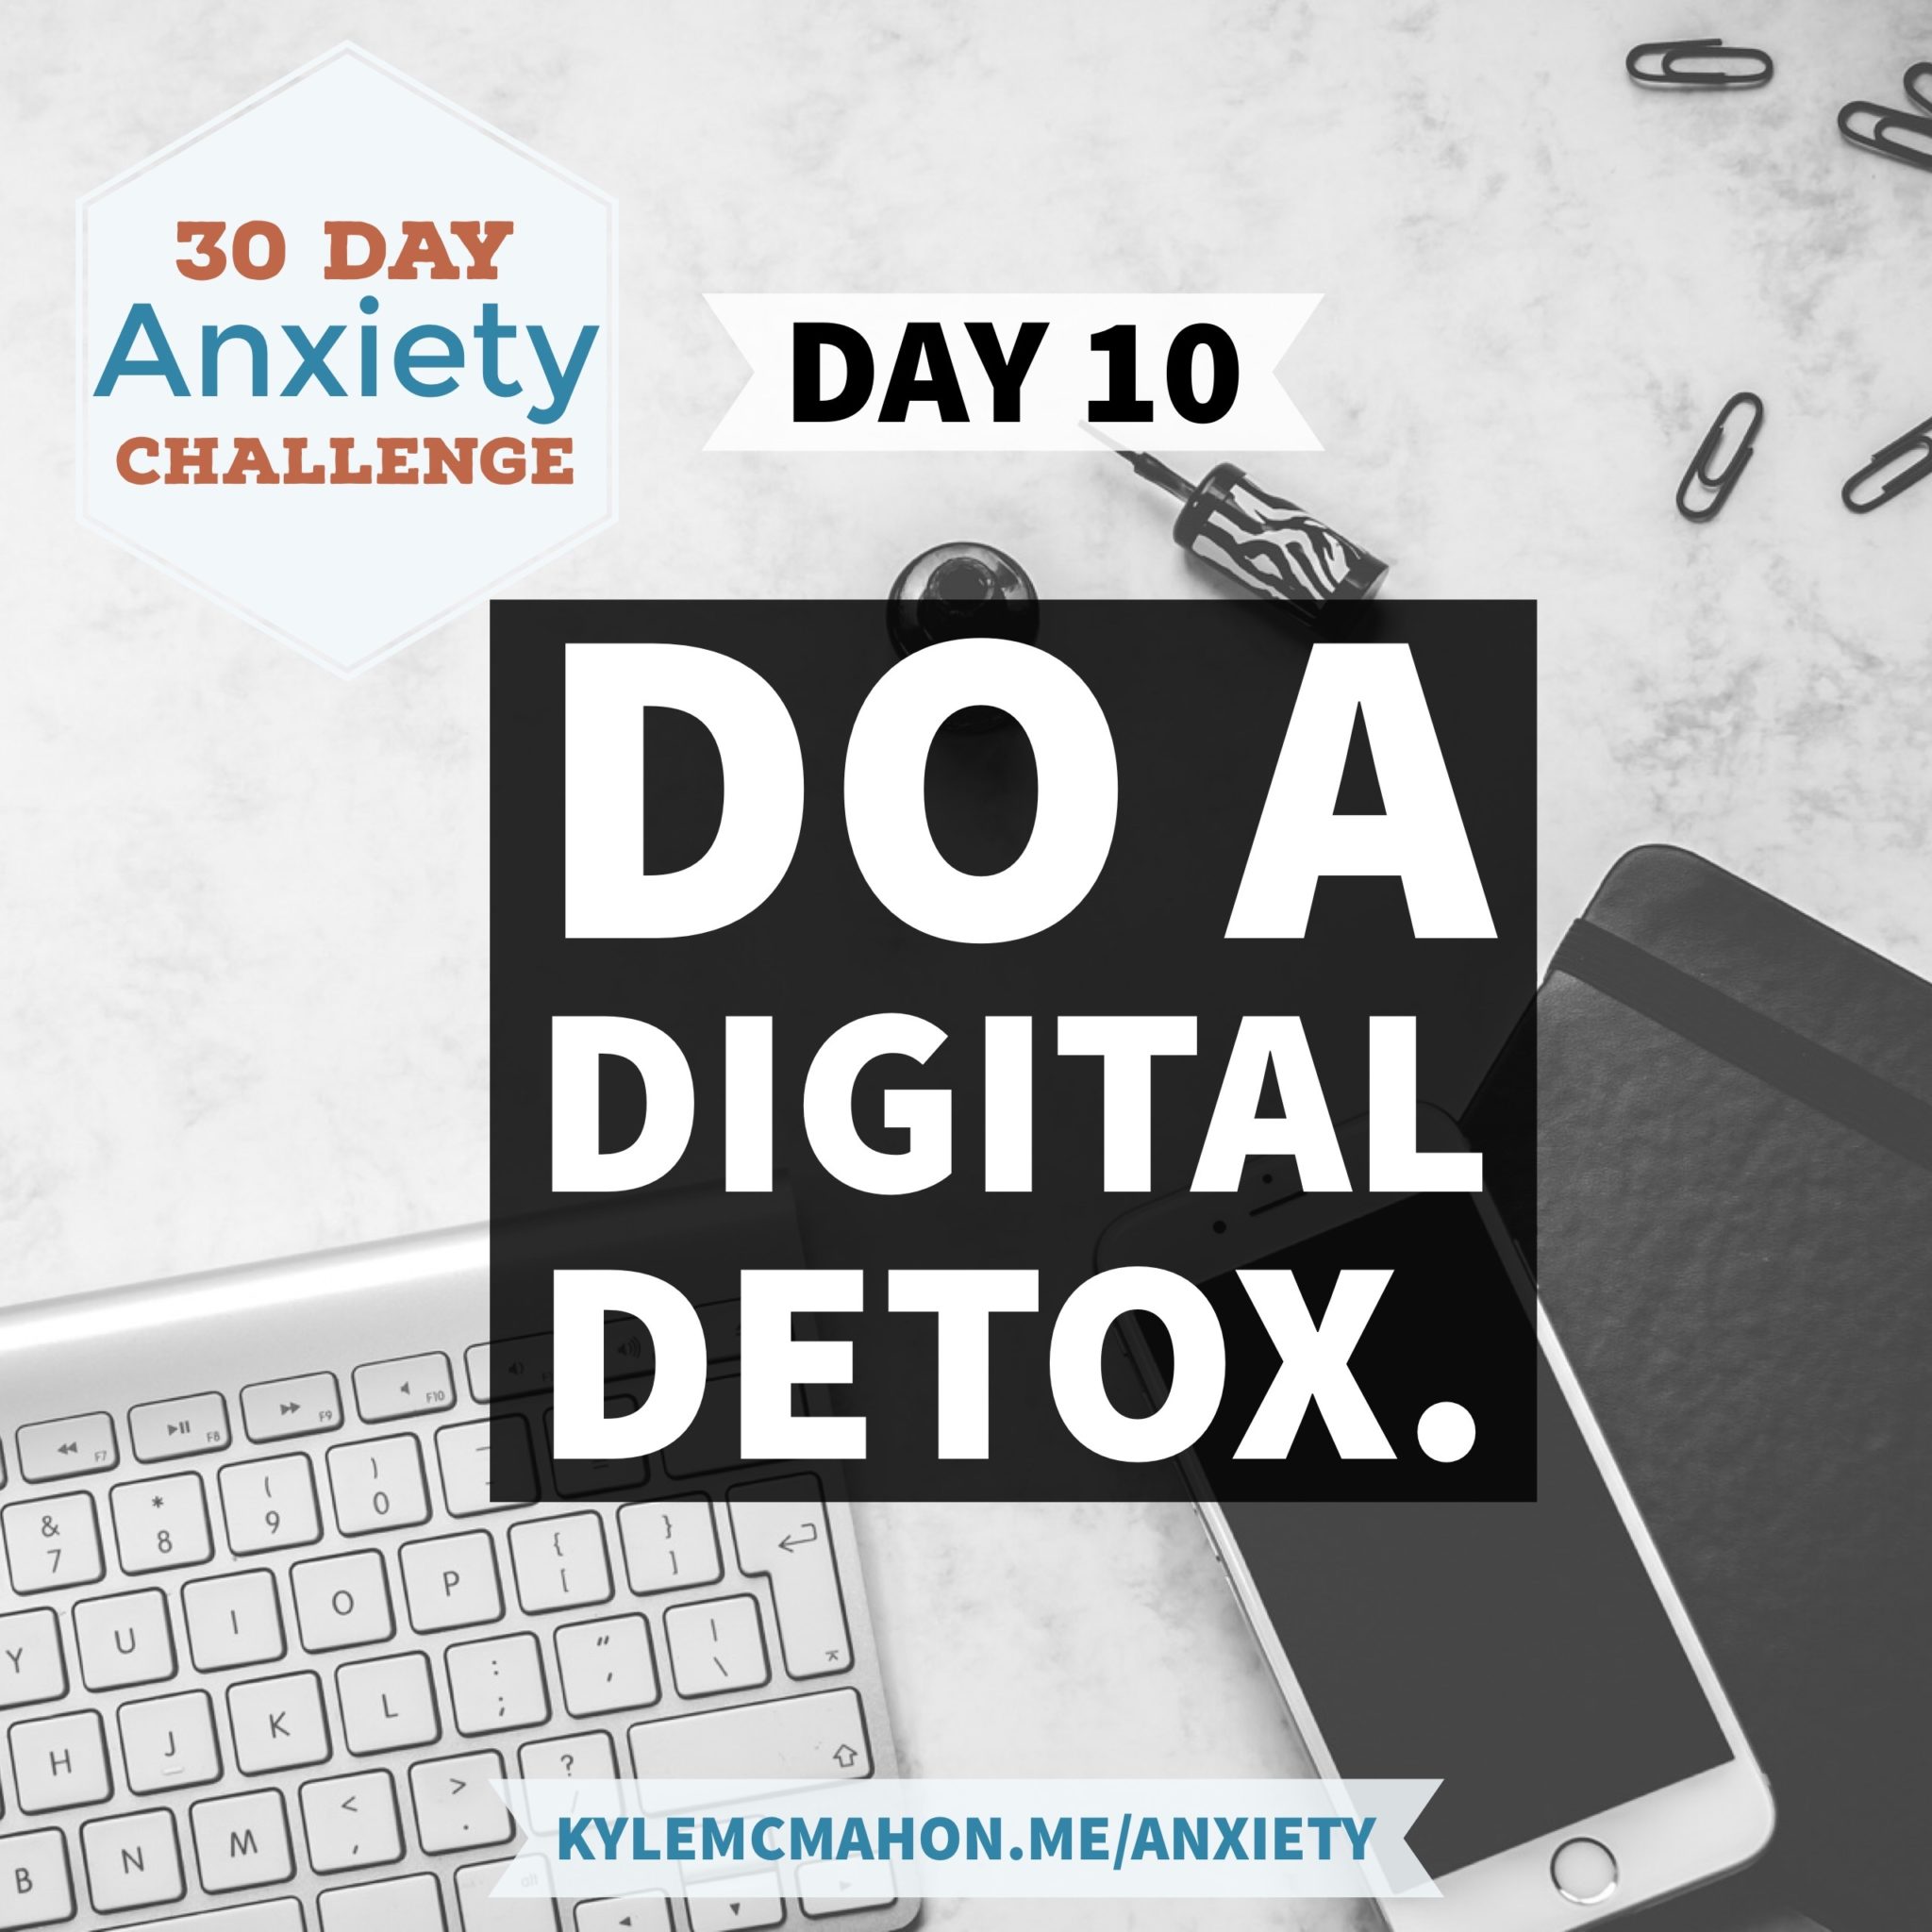 Day 10 of the 30 Day anxiety challenge with kyle mcmahon